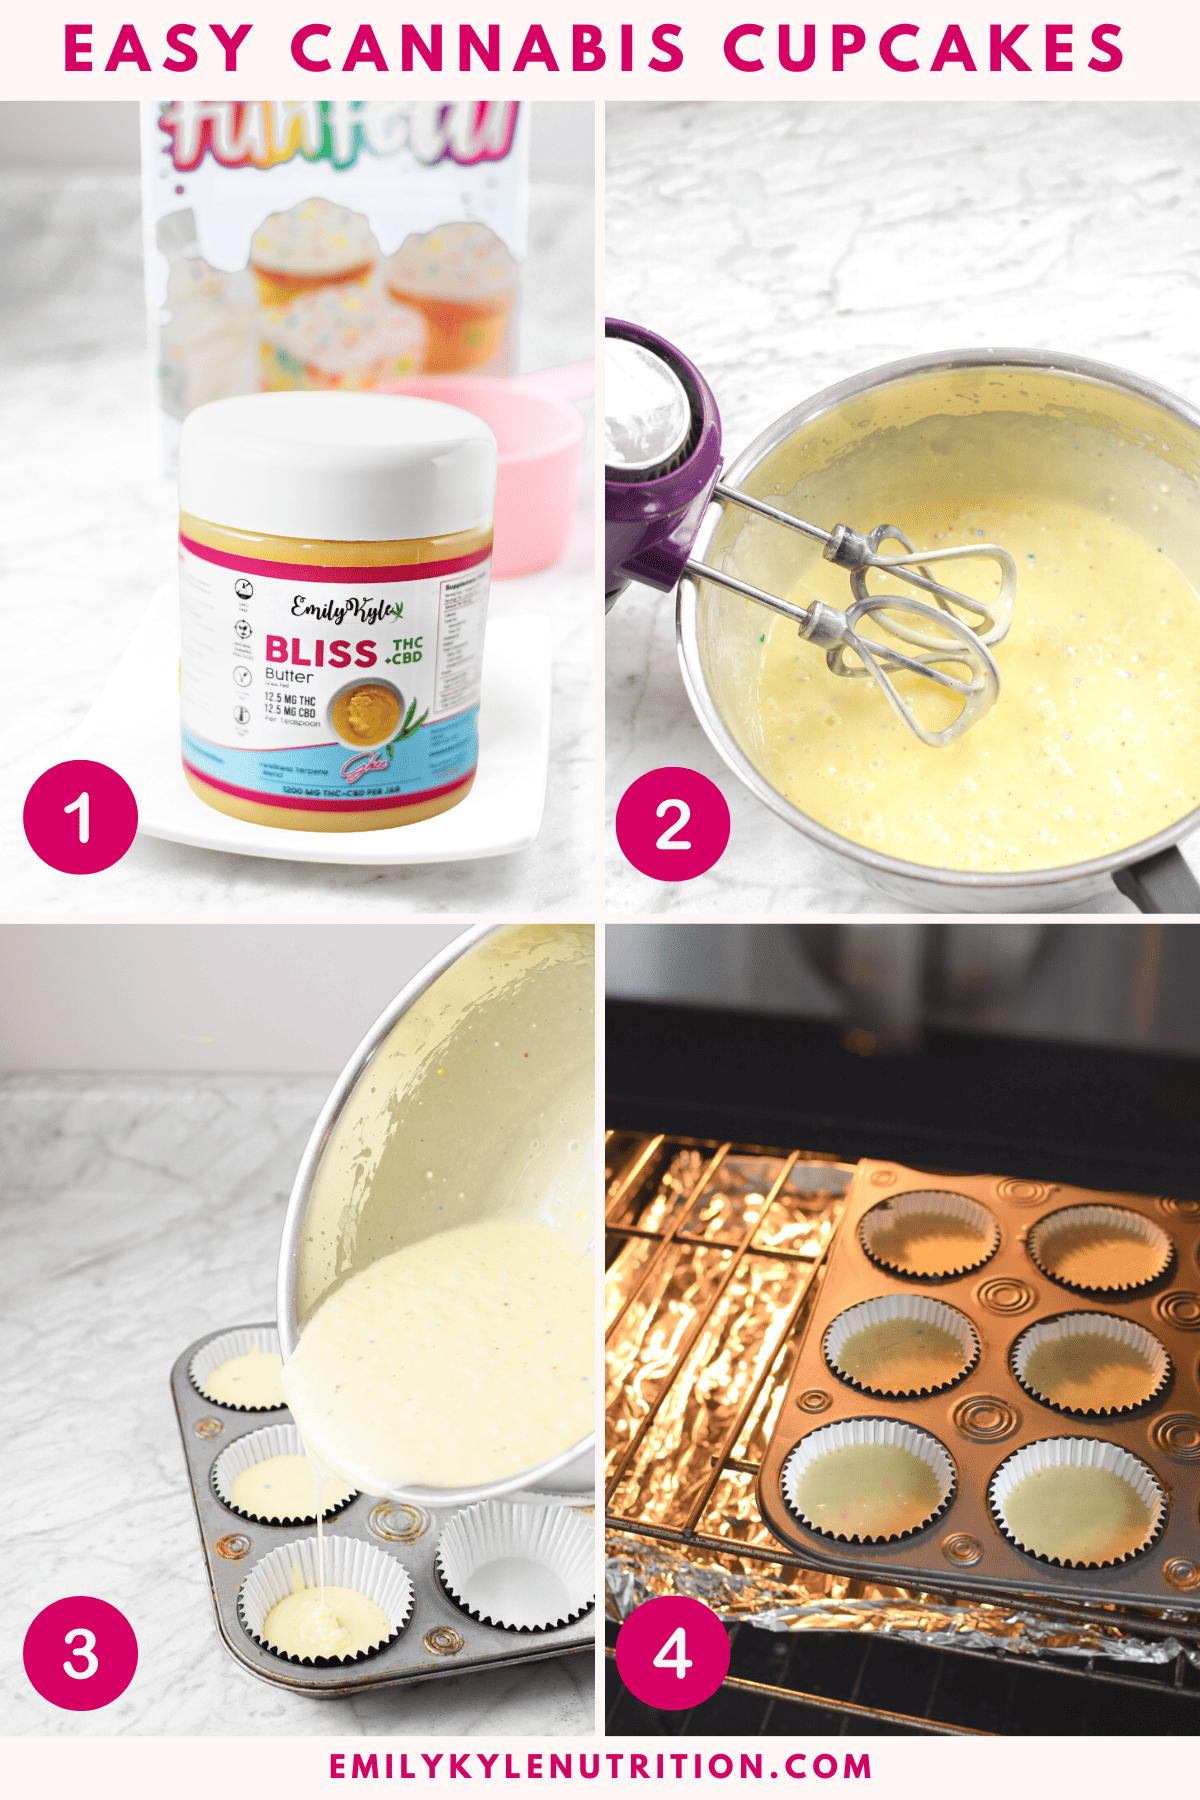 A four step ingredient collage showing the first four steps in making cannabis cupcakes